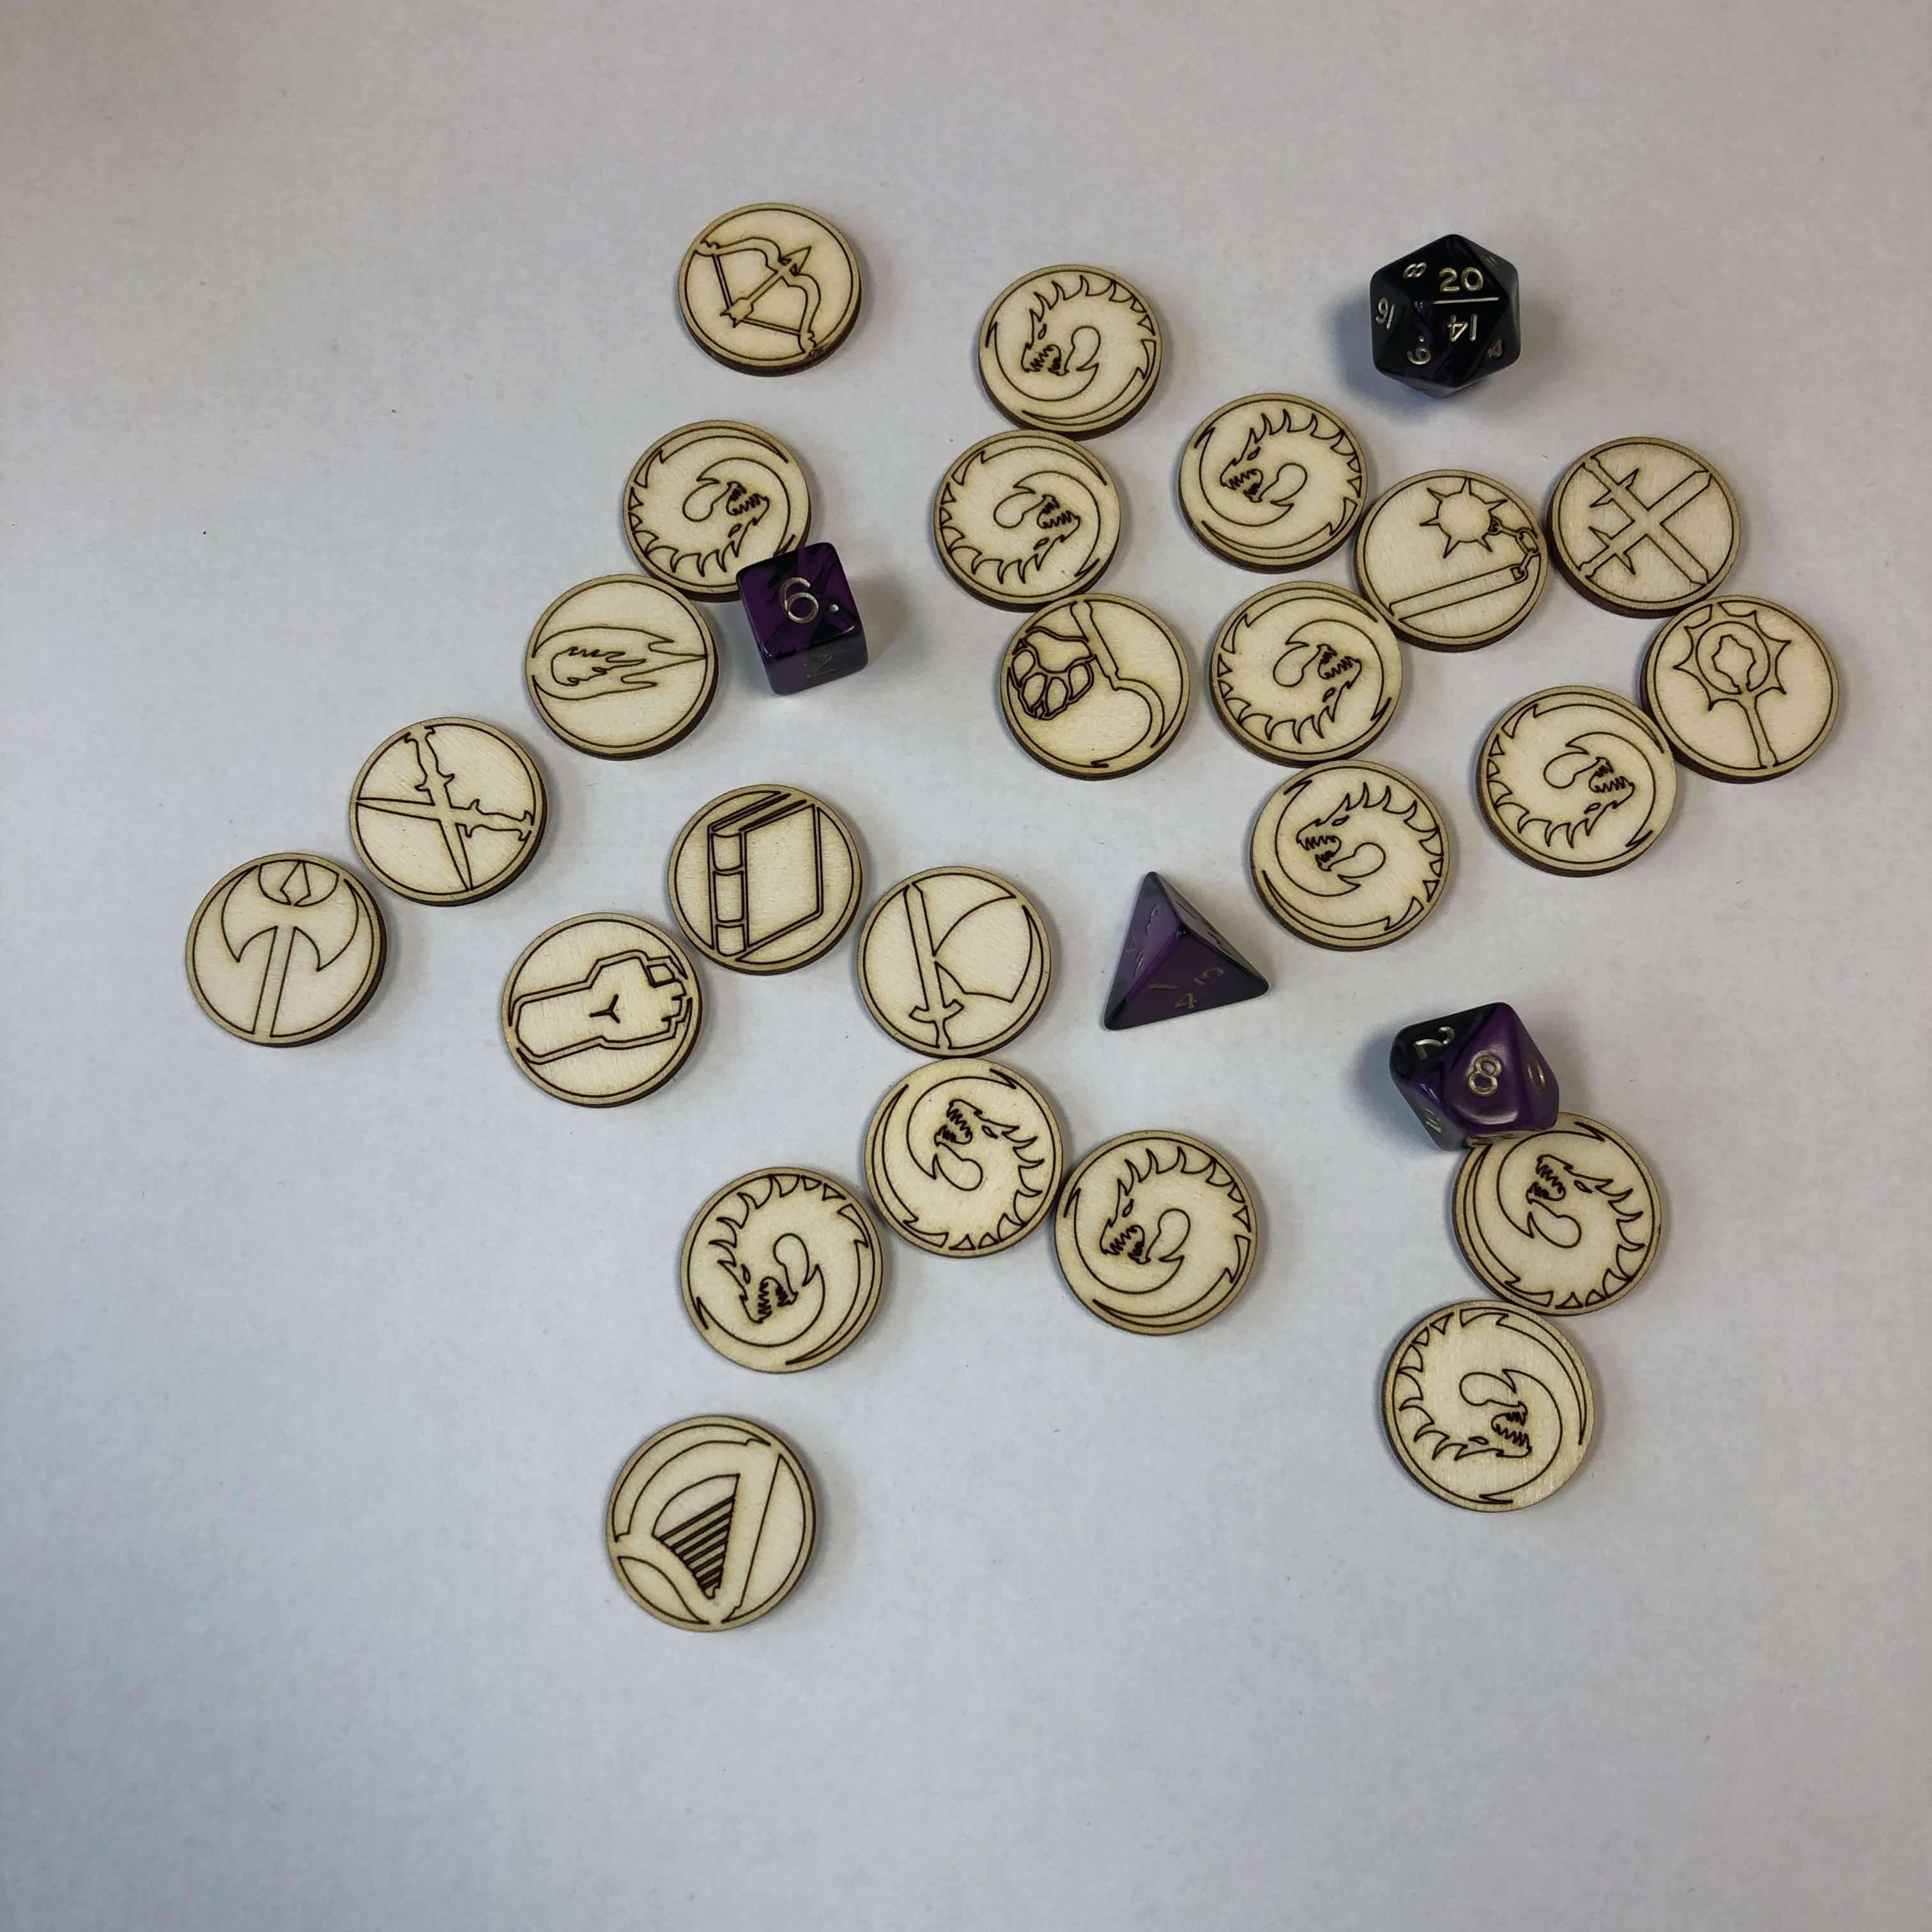 Red Berry Crafts Ltd:RBCBasics Core 24 Piece Gaming Token Set